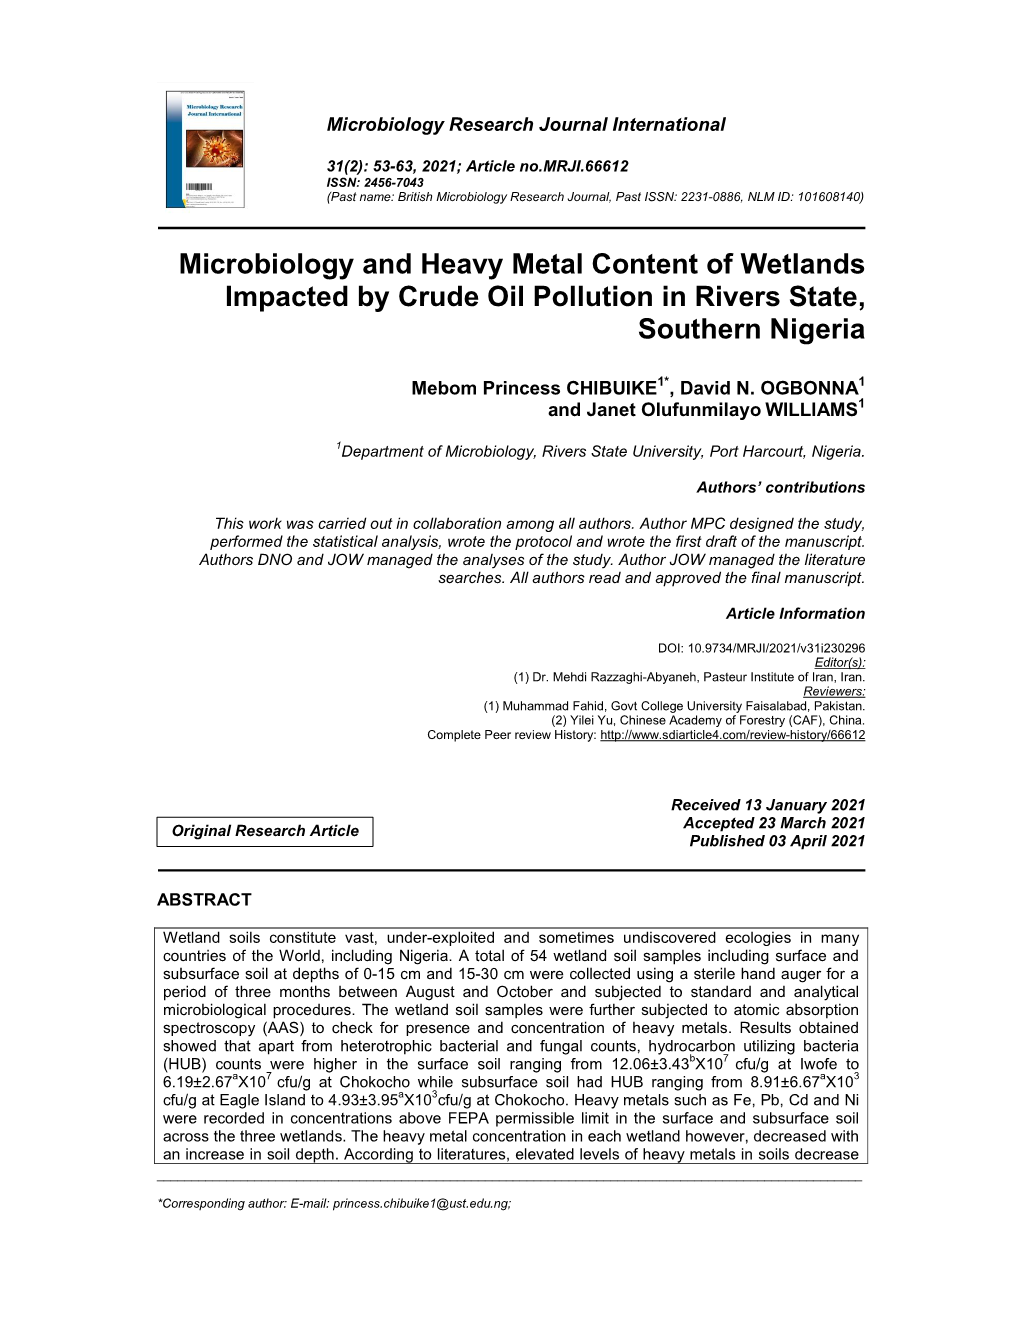 Microbiology and Heavy Metal Content of Wetlands Impacted by Crude Oil Pollution in Rivers State, Southern Nigeria